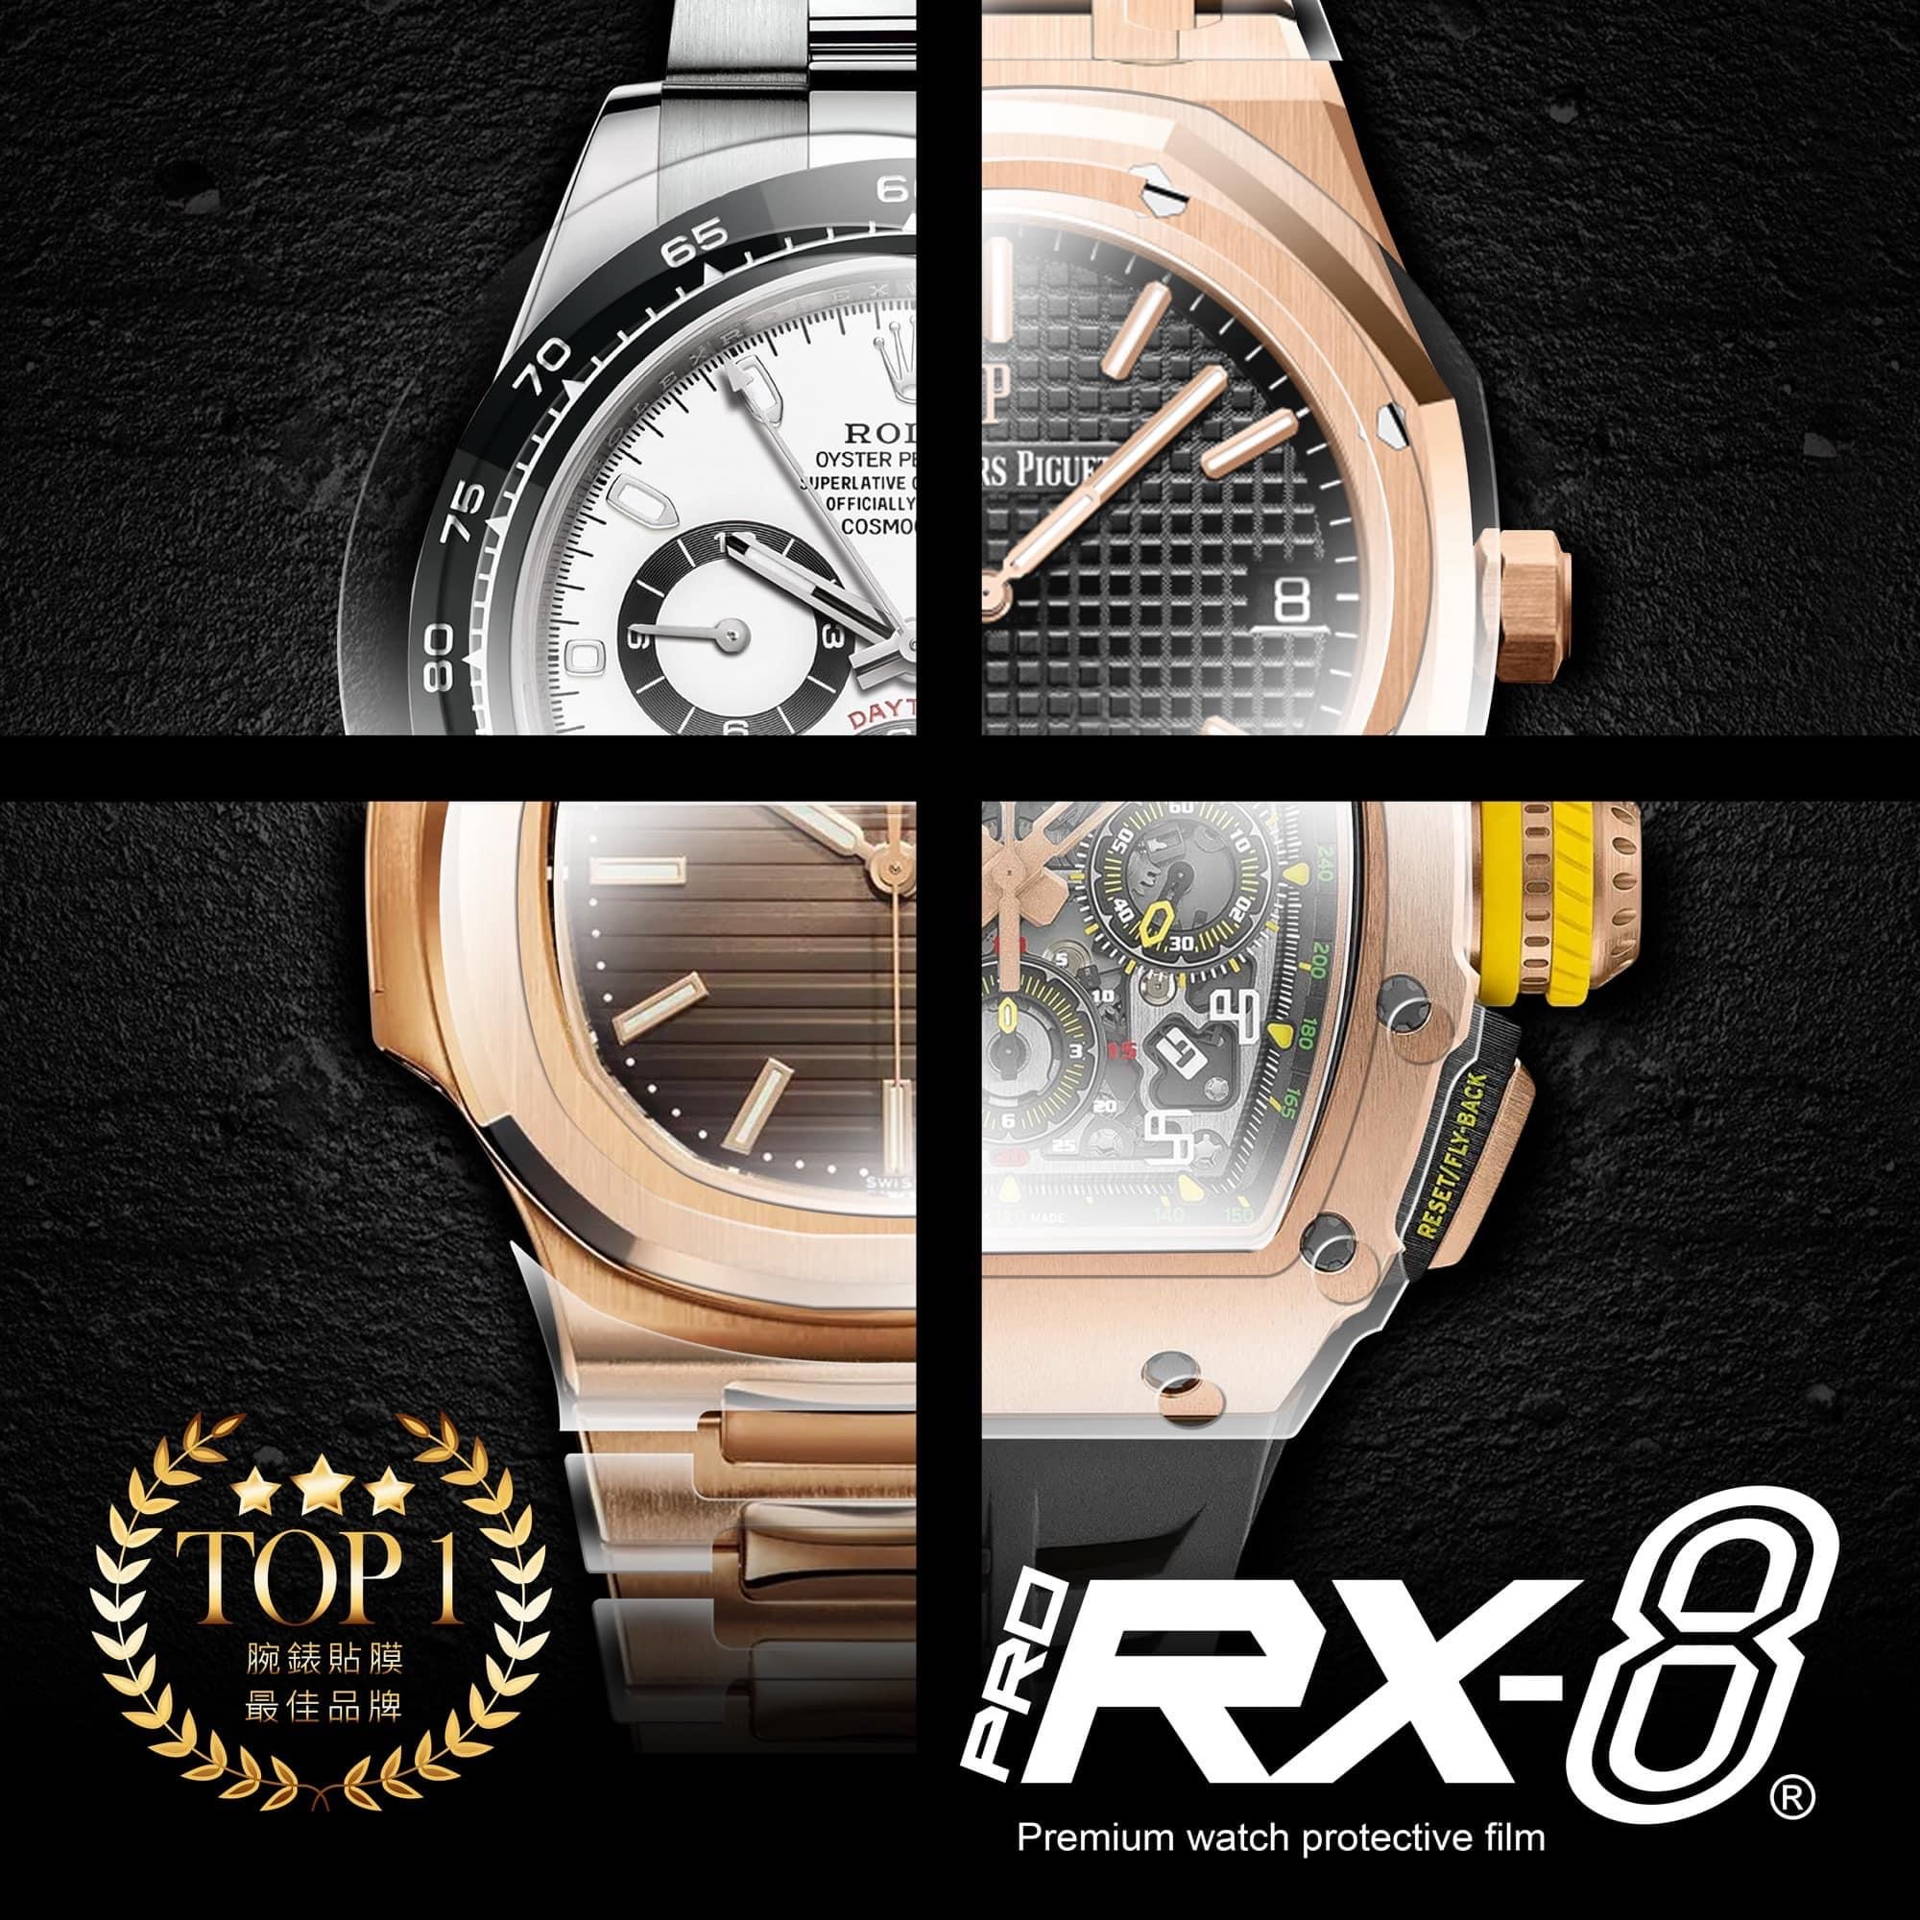 rx8 poster for rolex, audemars pigeut, patek philippe, richard mille watches. cut to precision, with patented self healing multi-layered TPU